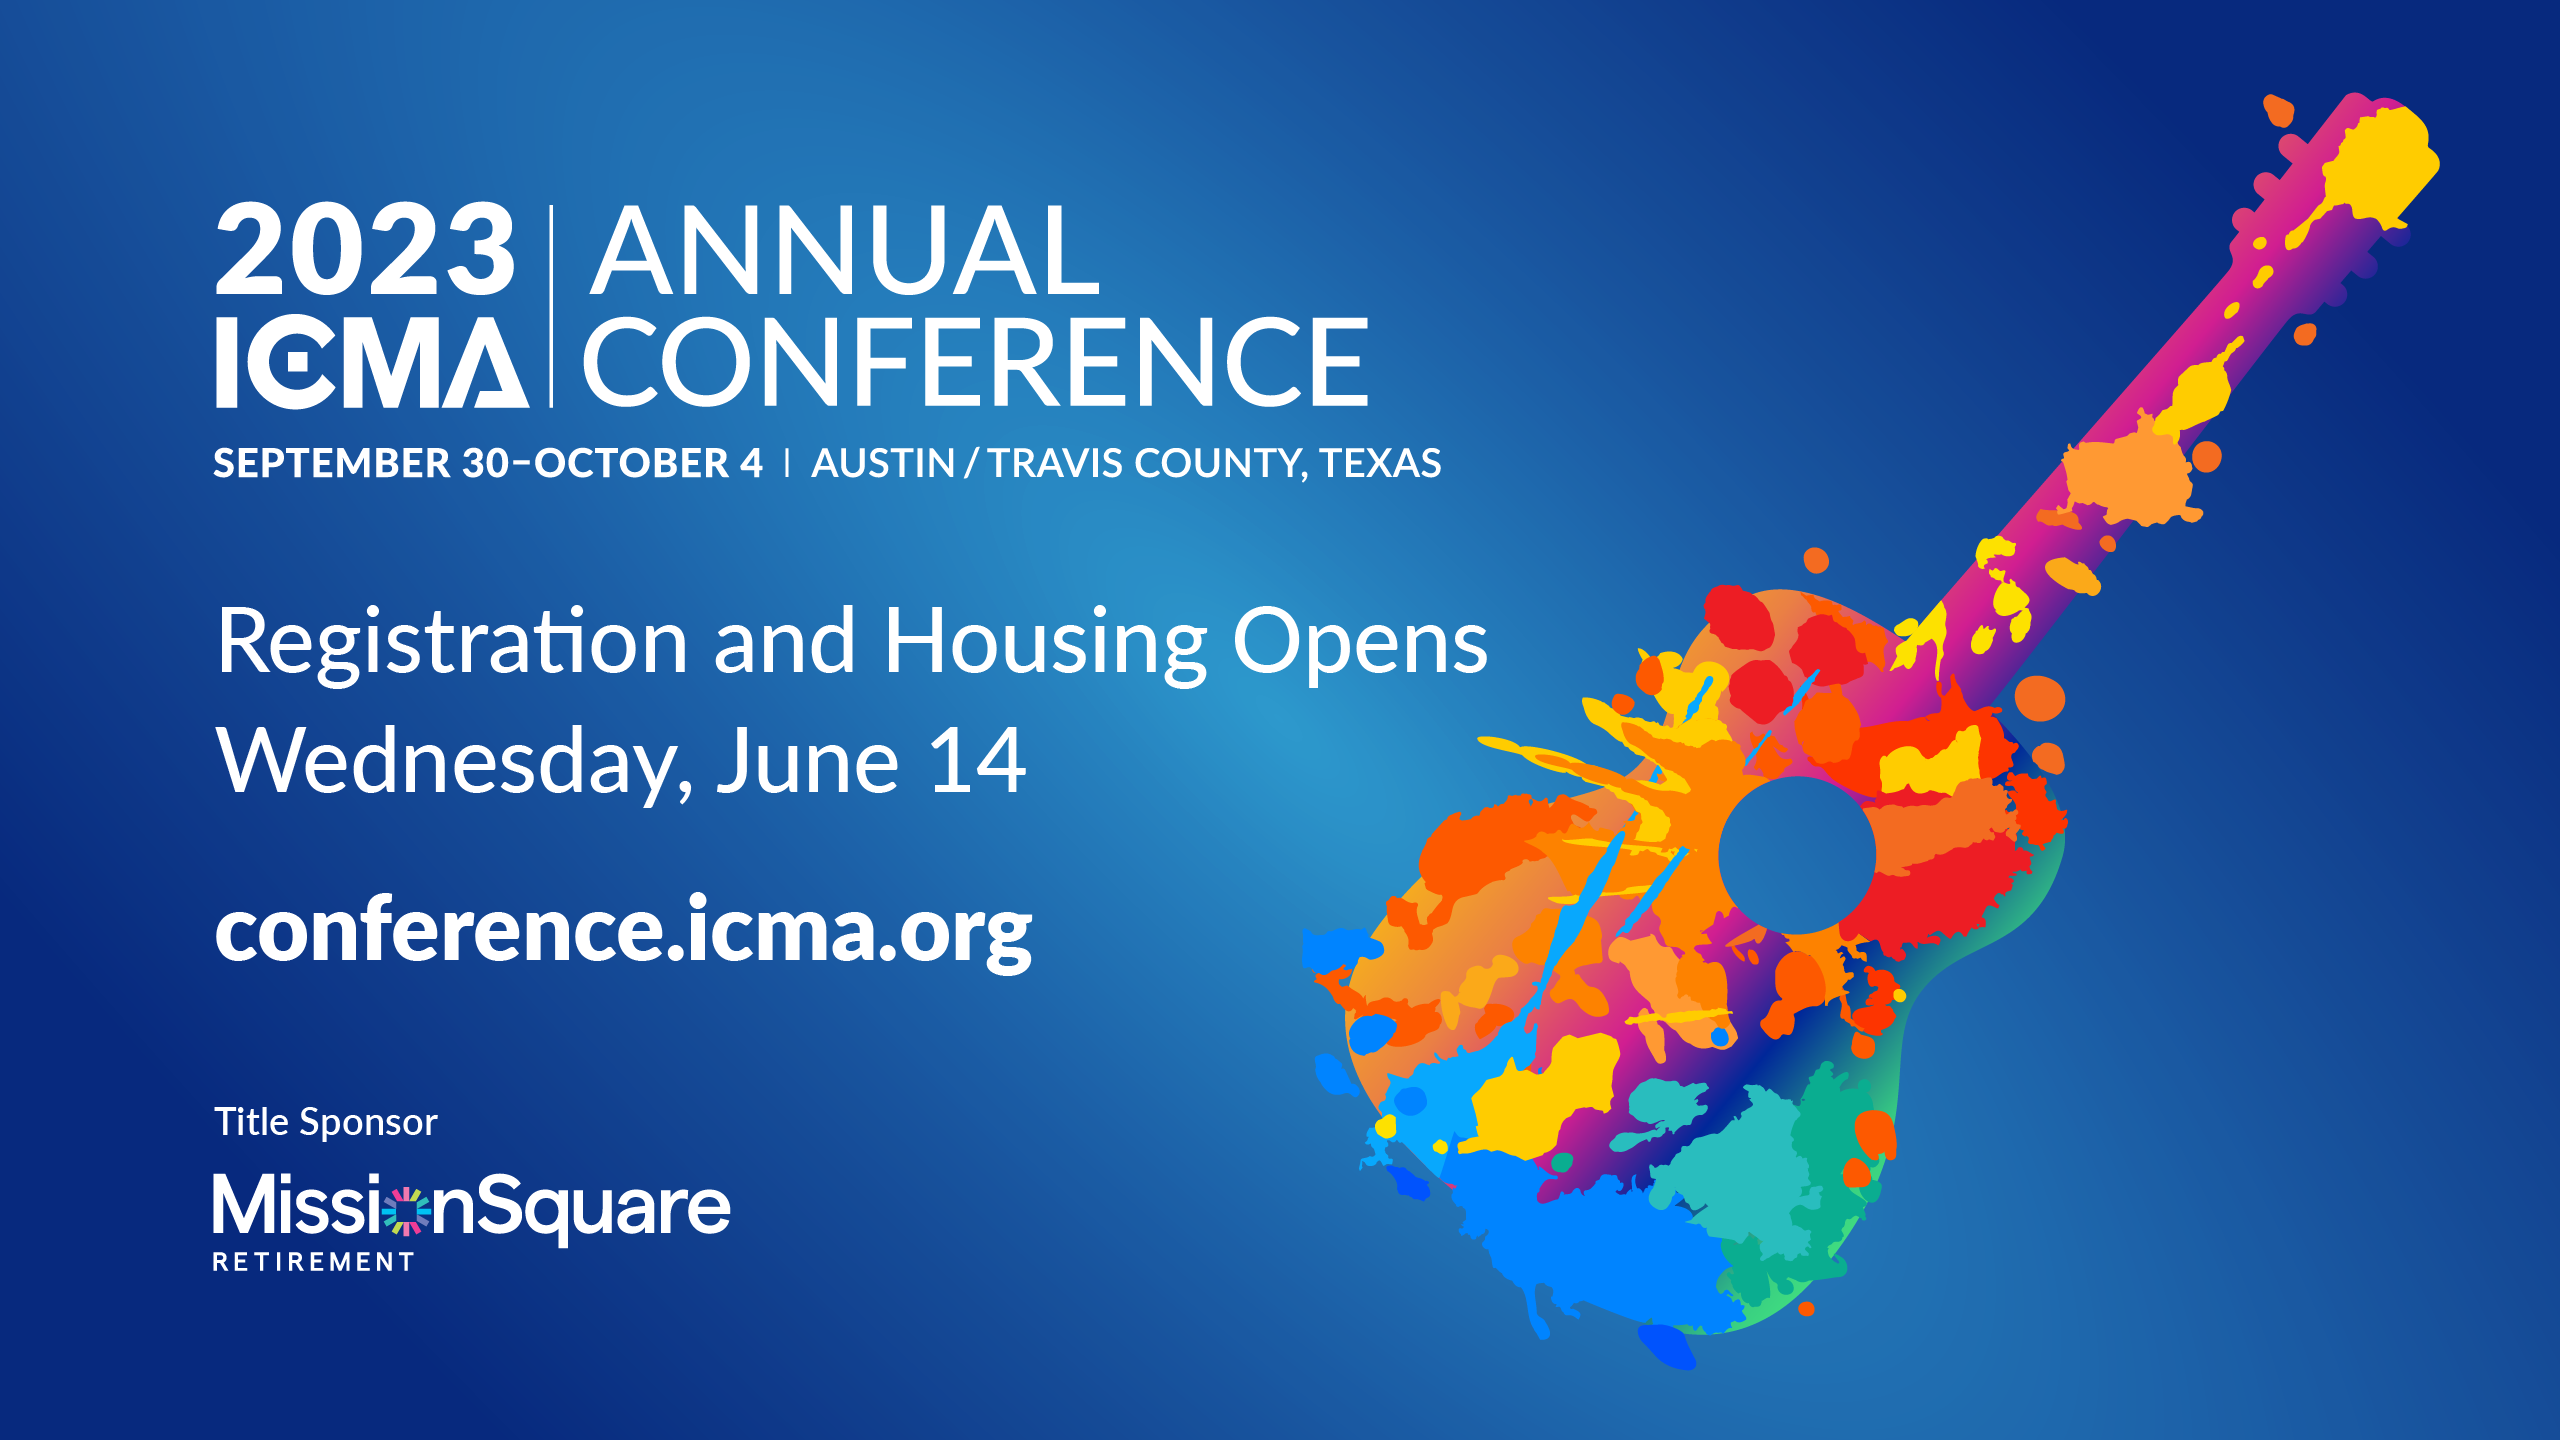 ICMA Annual Conference Registration Opens Wednesday, June 14, at 12 p.m